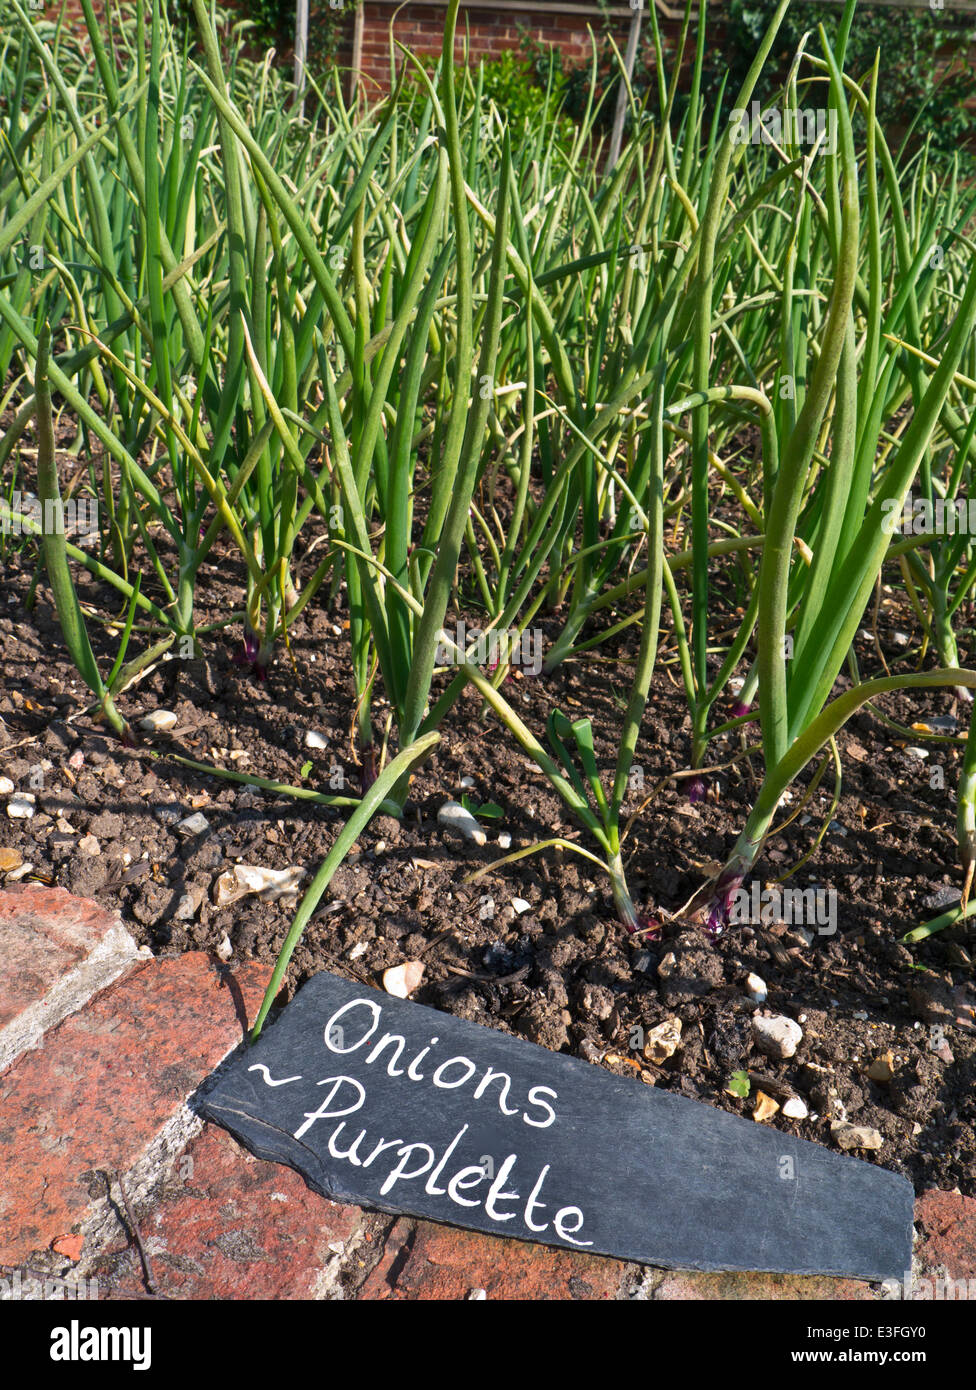 Sweet Purplette Onions growing in a restaurant kitchen garden with slate name identification label Stock Photo